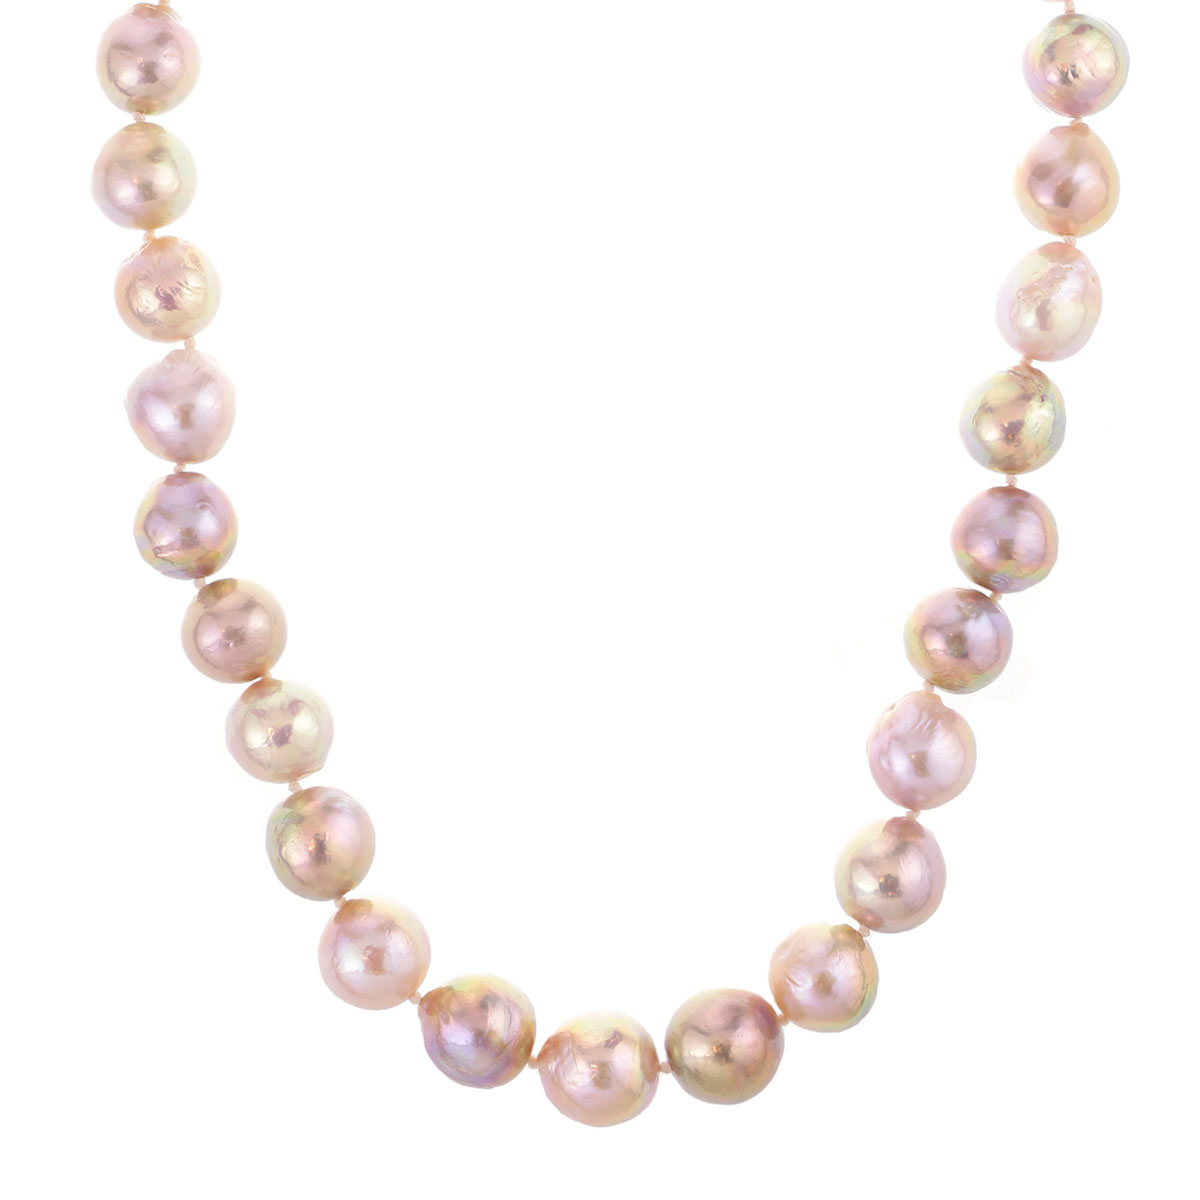 TARA Pearls Pastel Freshwater Cultured Pearl Strand Necklace in ...